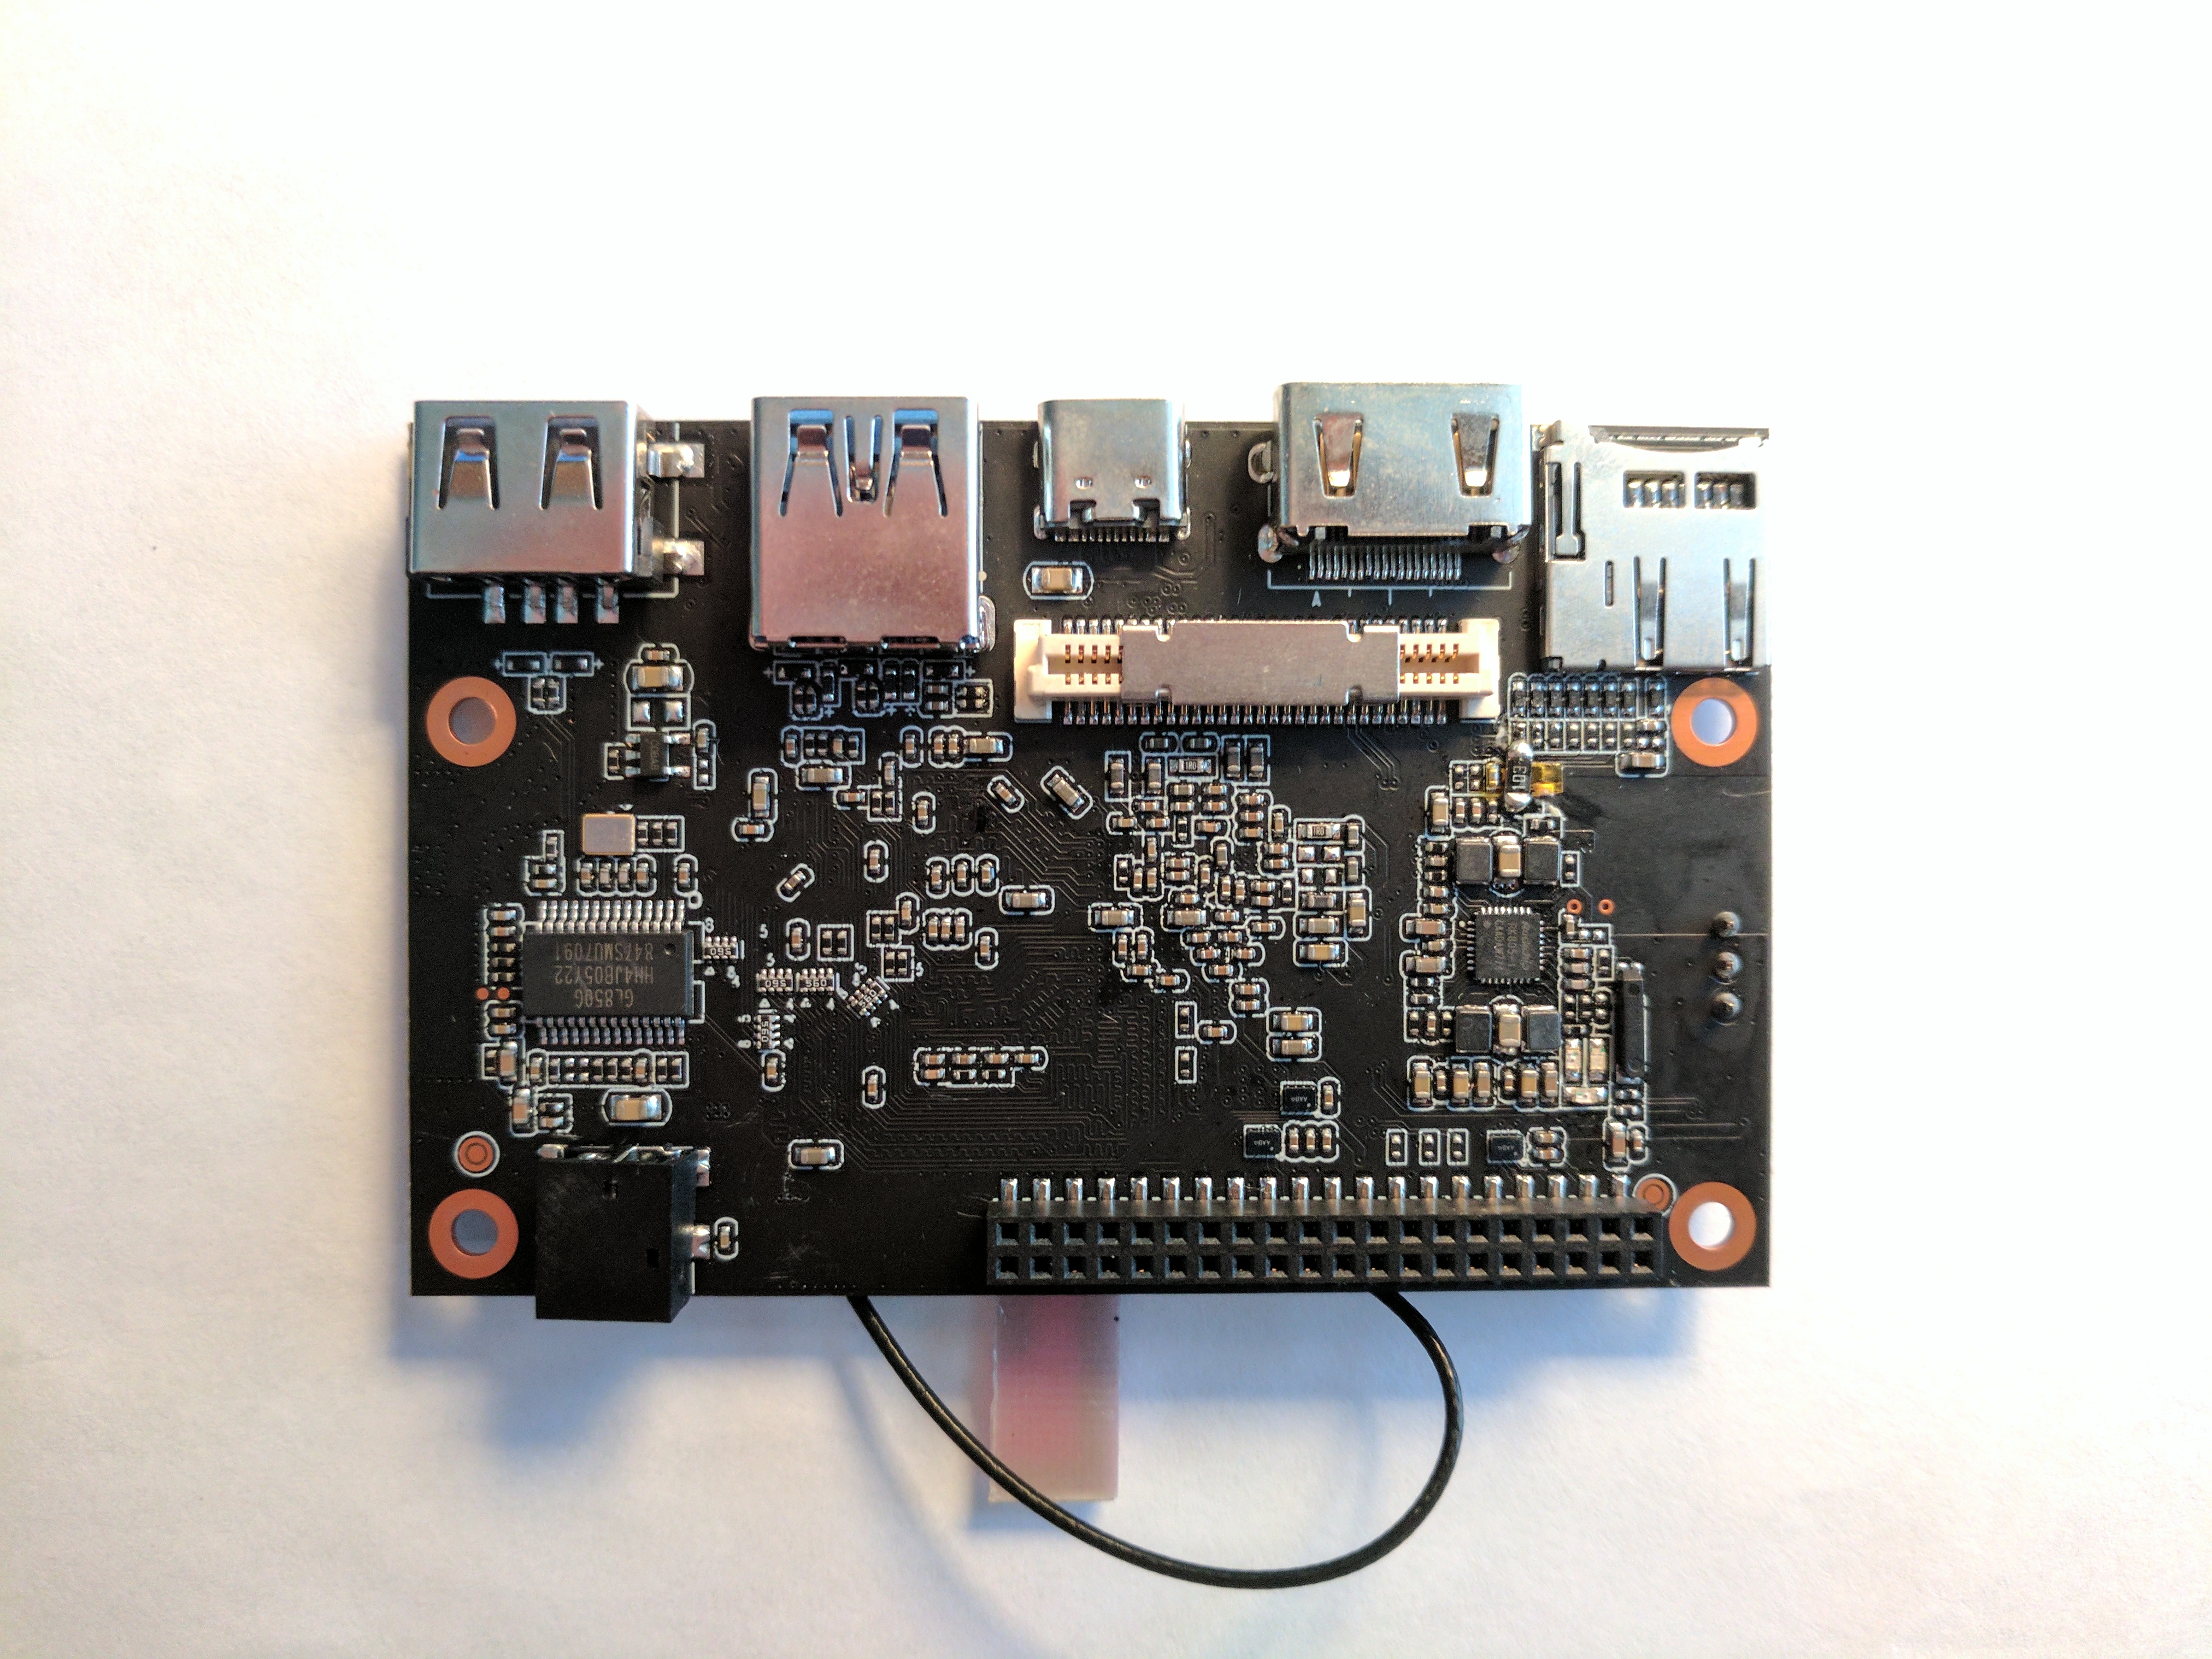 The android board, removed from a control hub